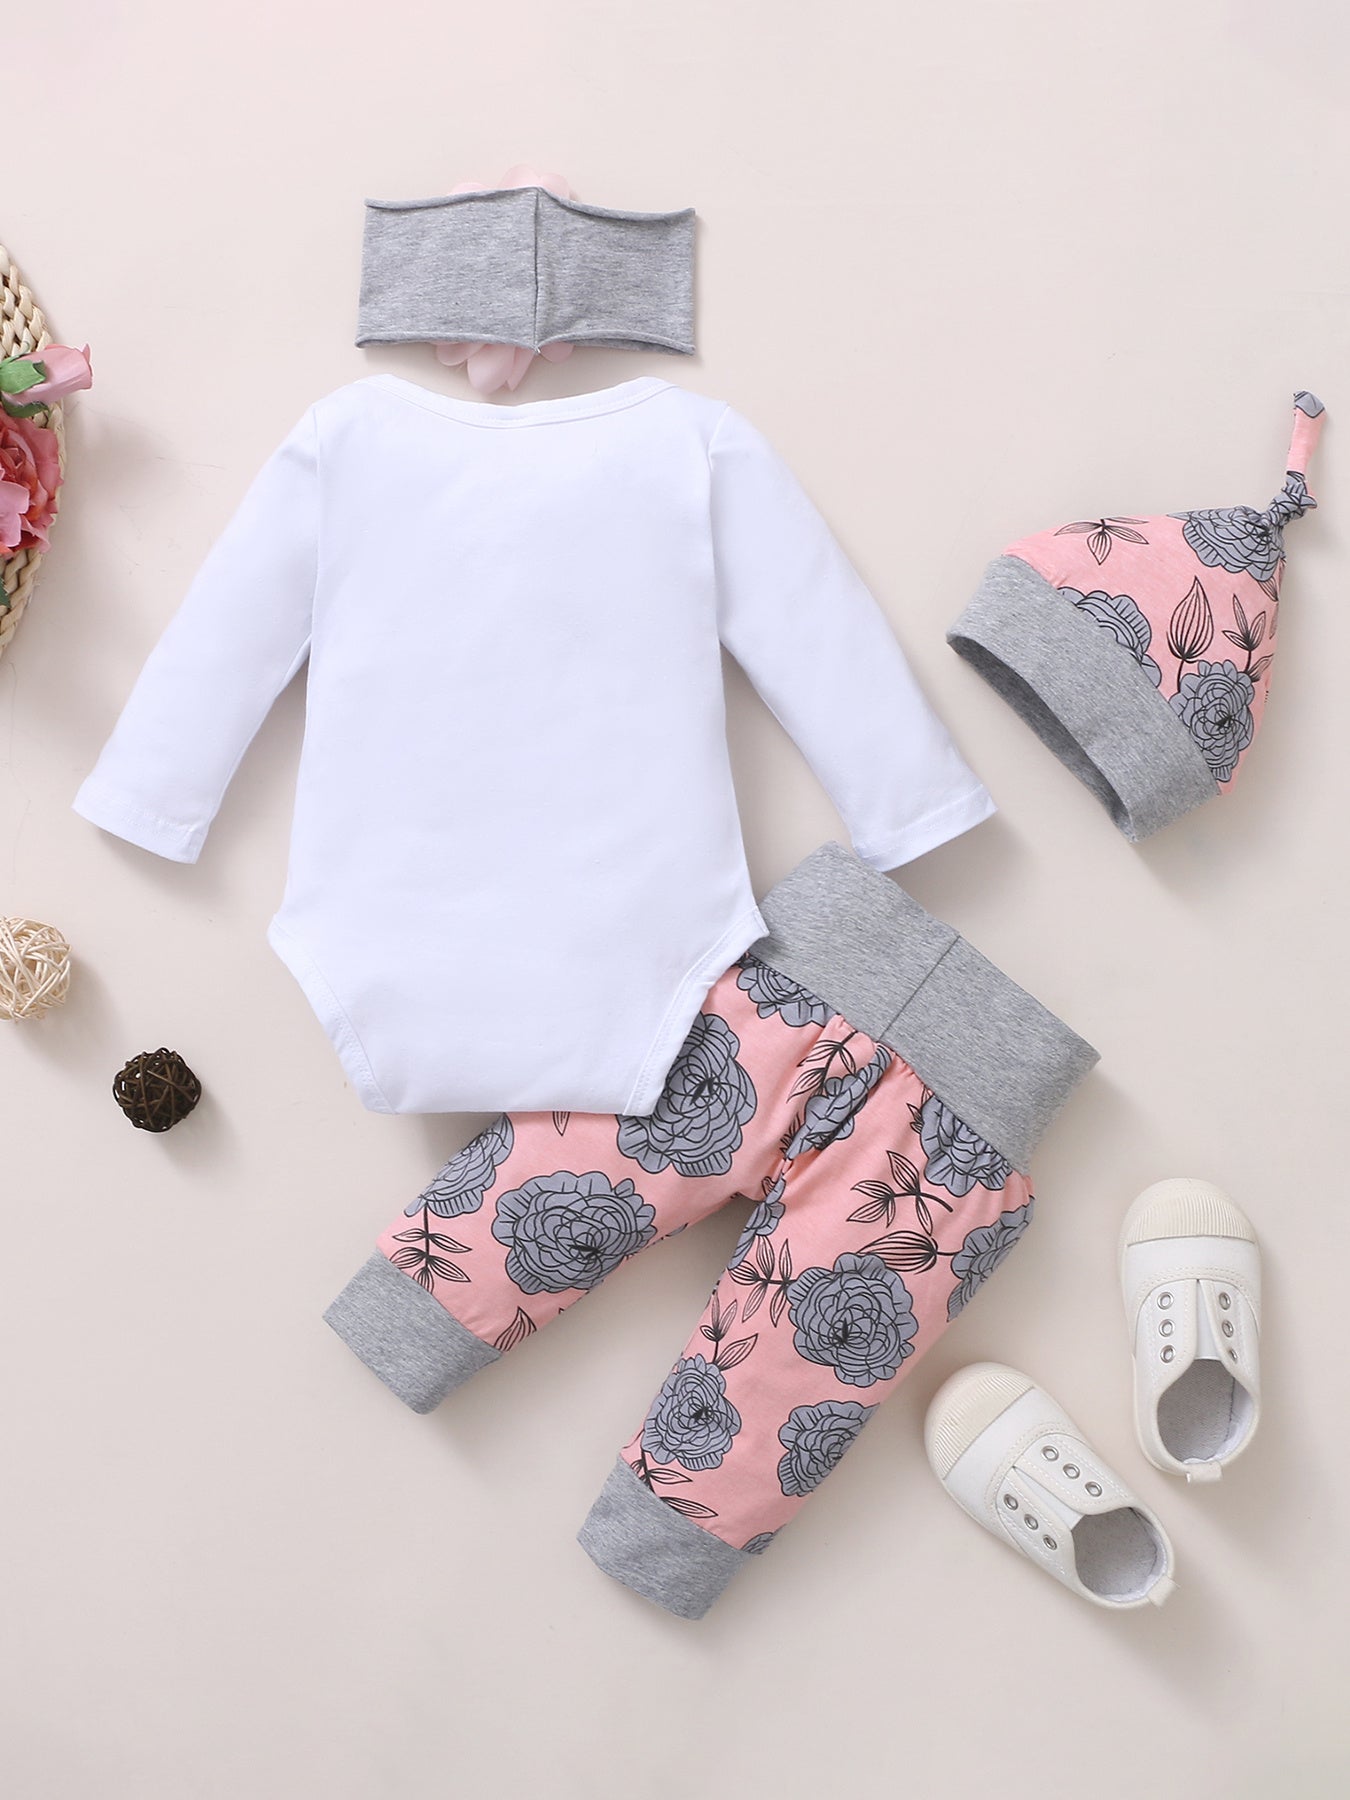 Newborn Baby Girl Clothes Outfit Set